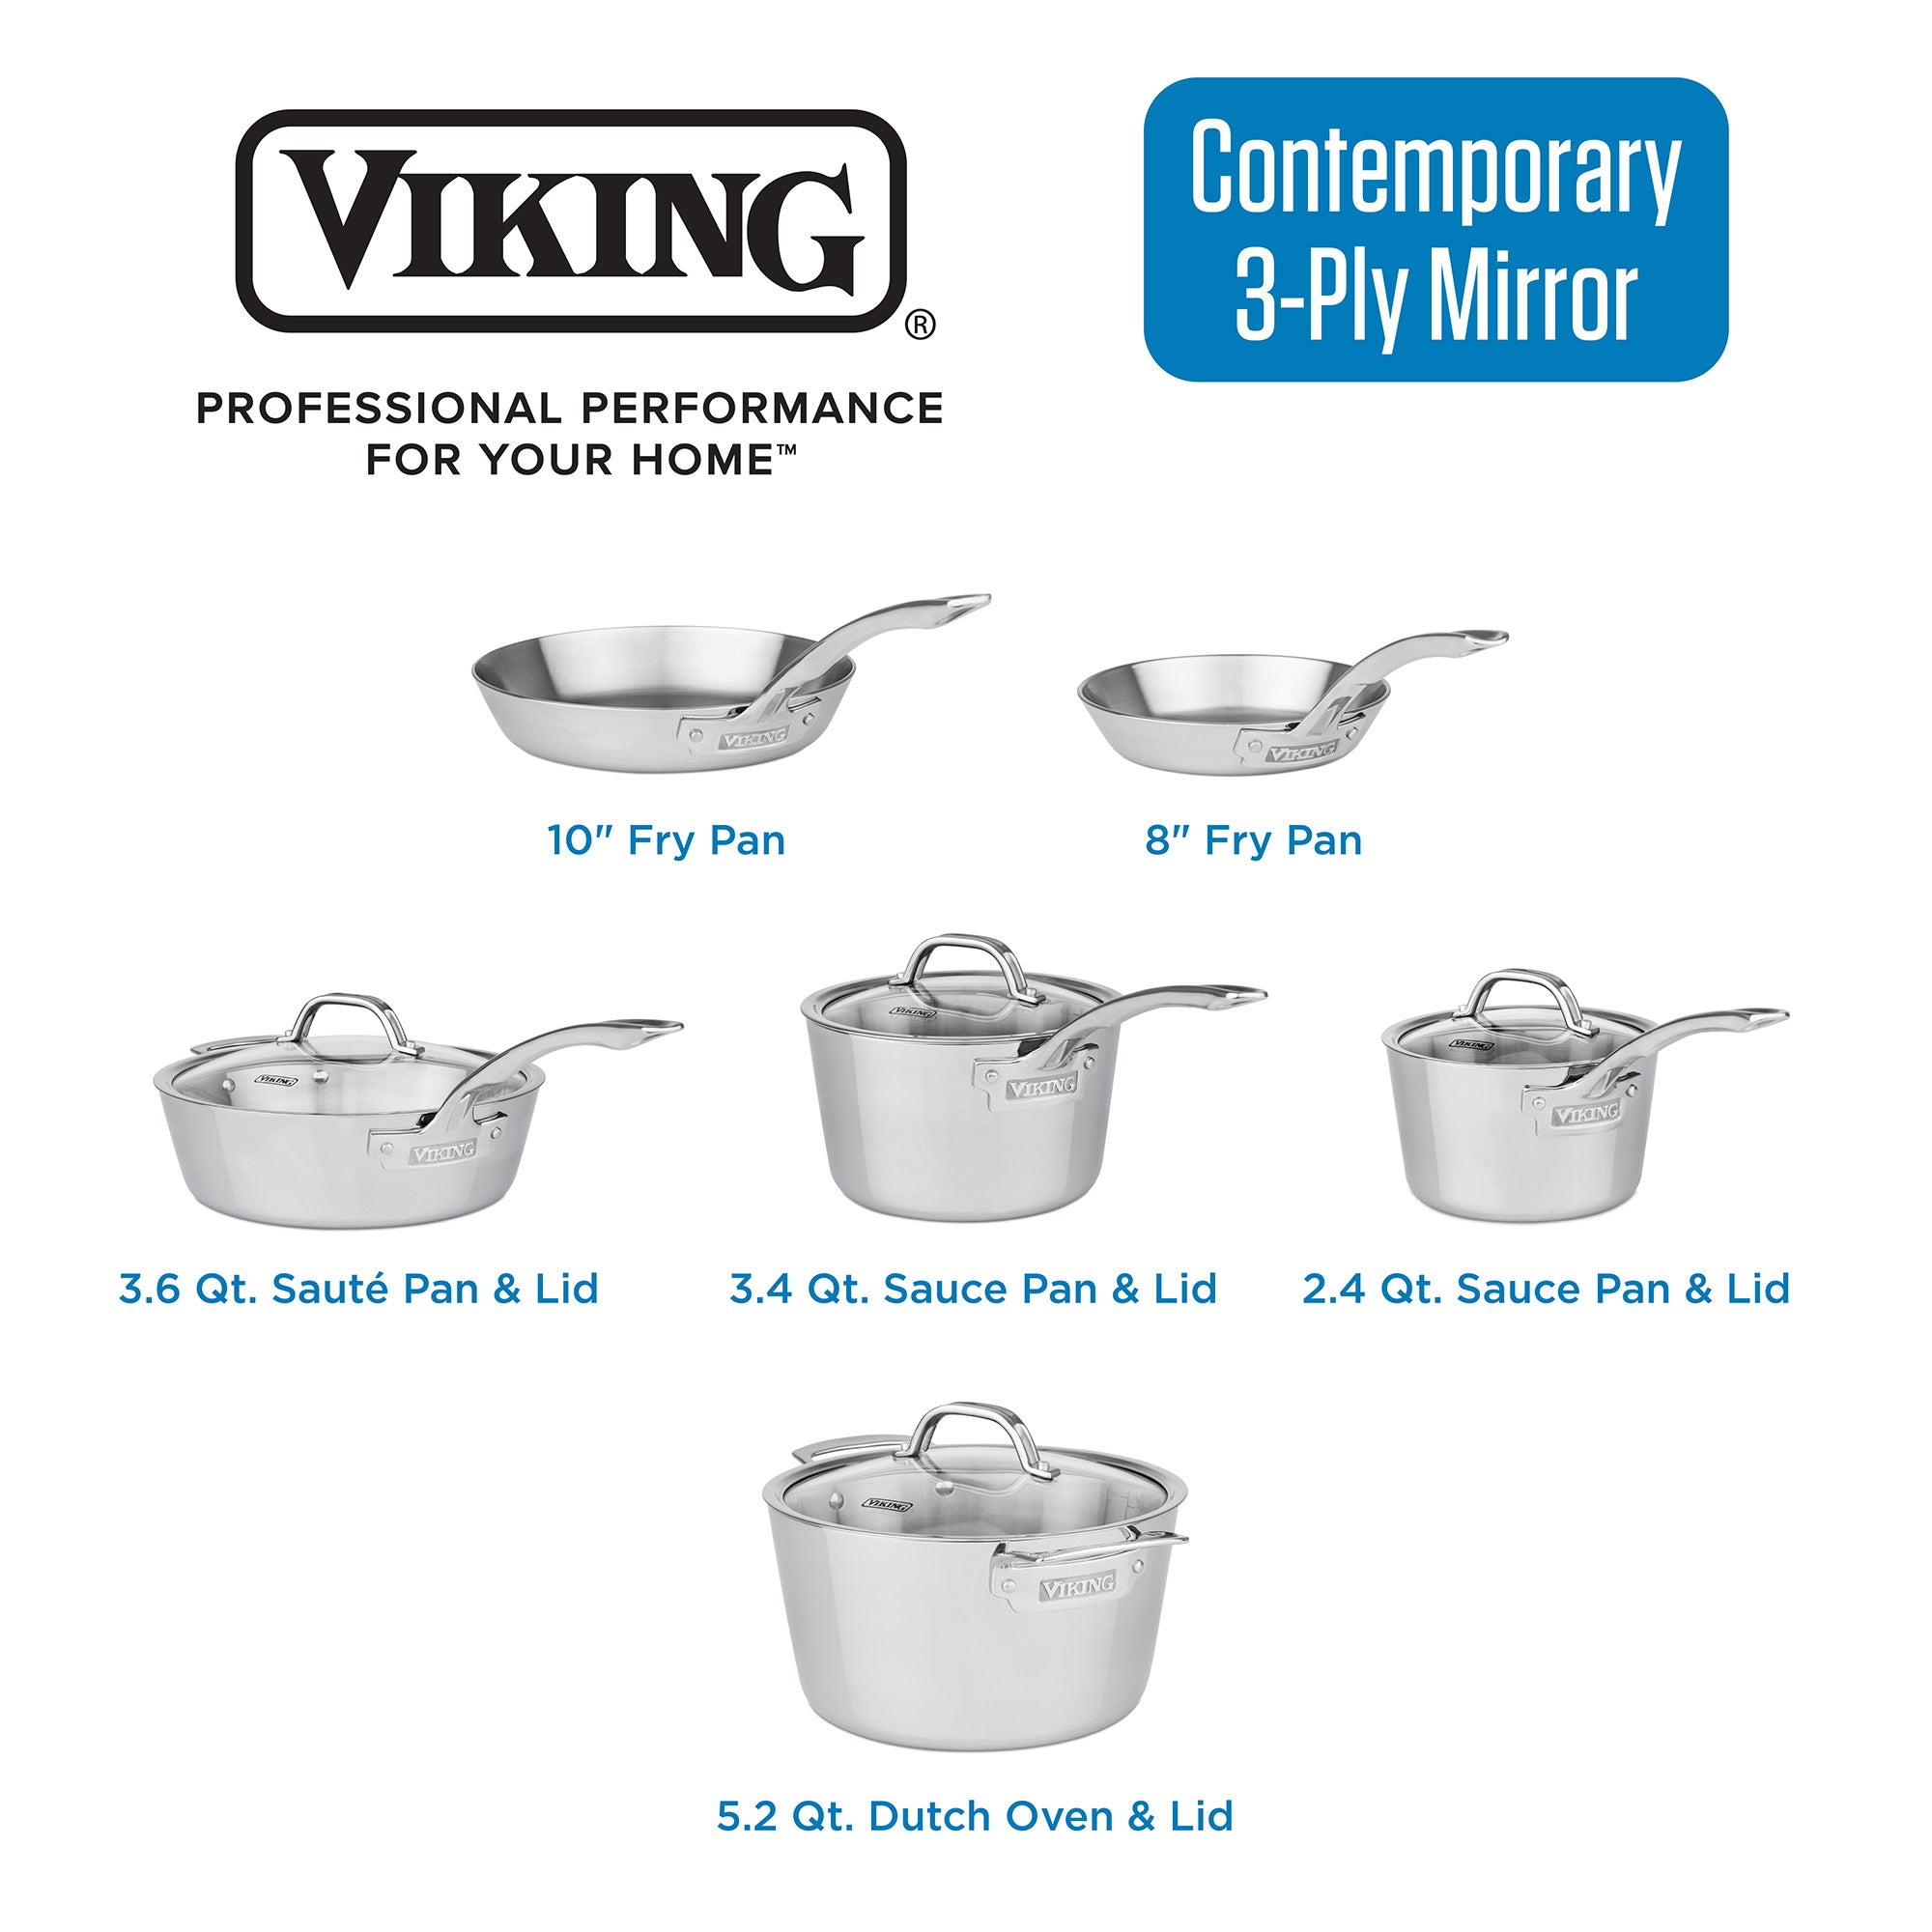 Set Of Ten Measuring Cup,simply Modern Professional 10-pc Pp